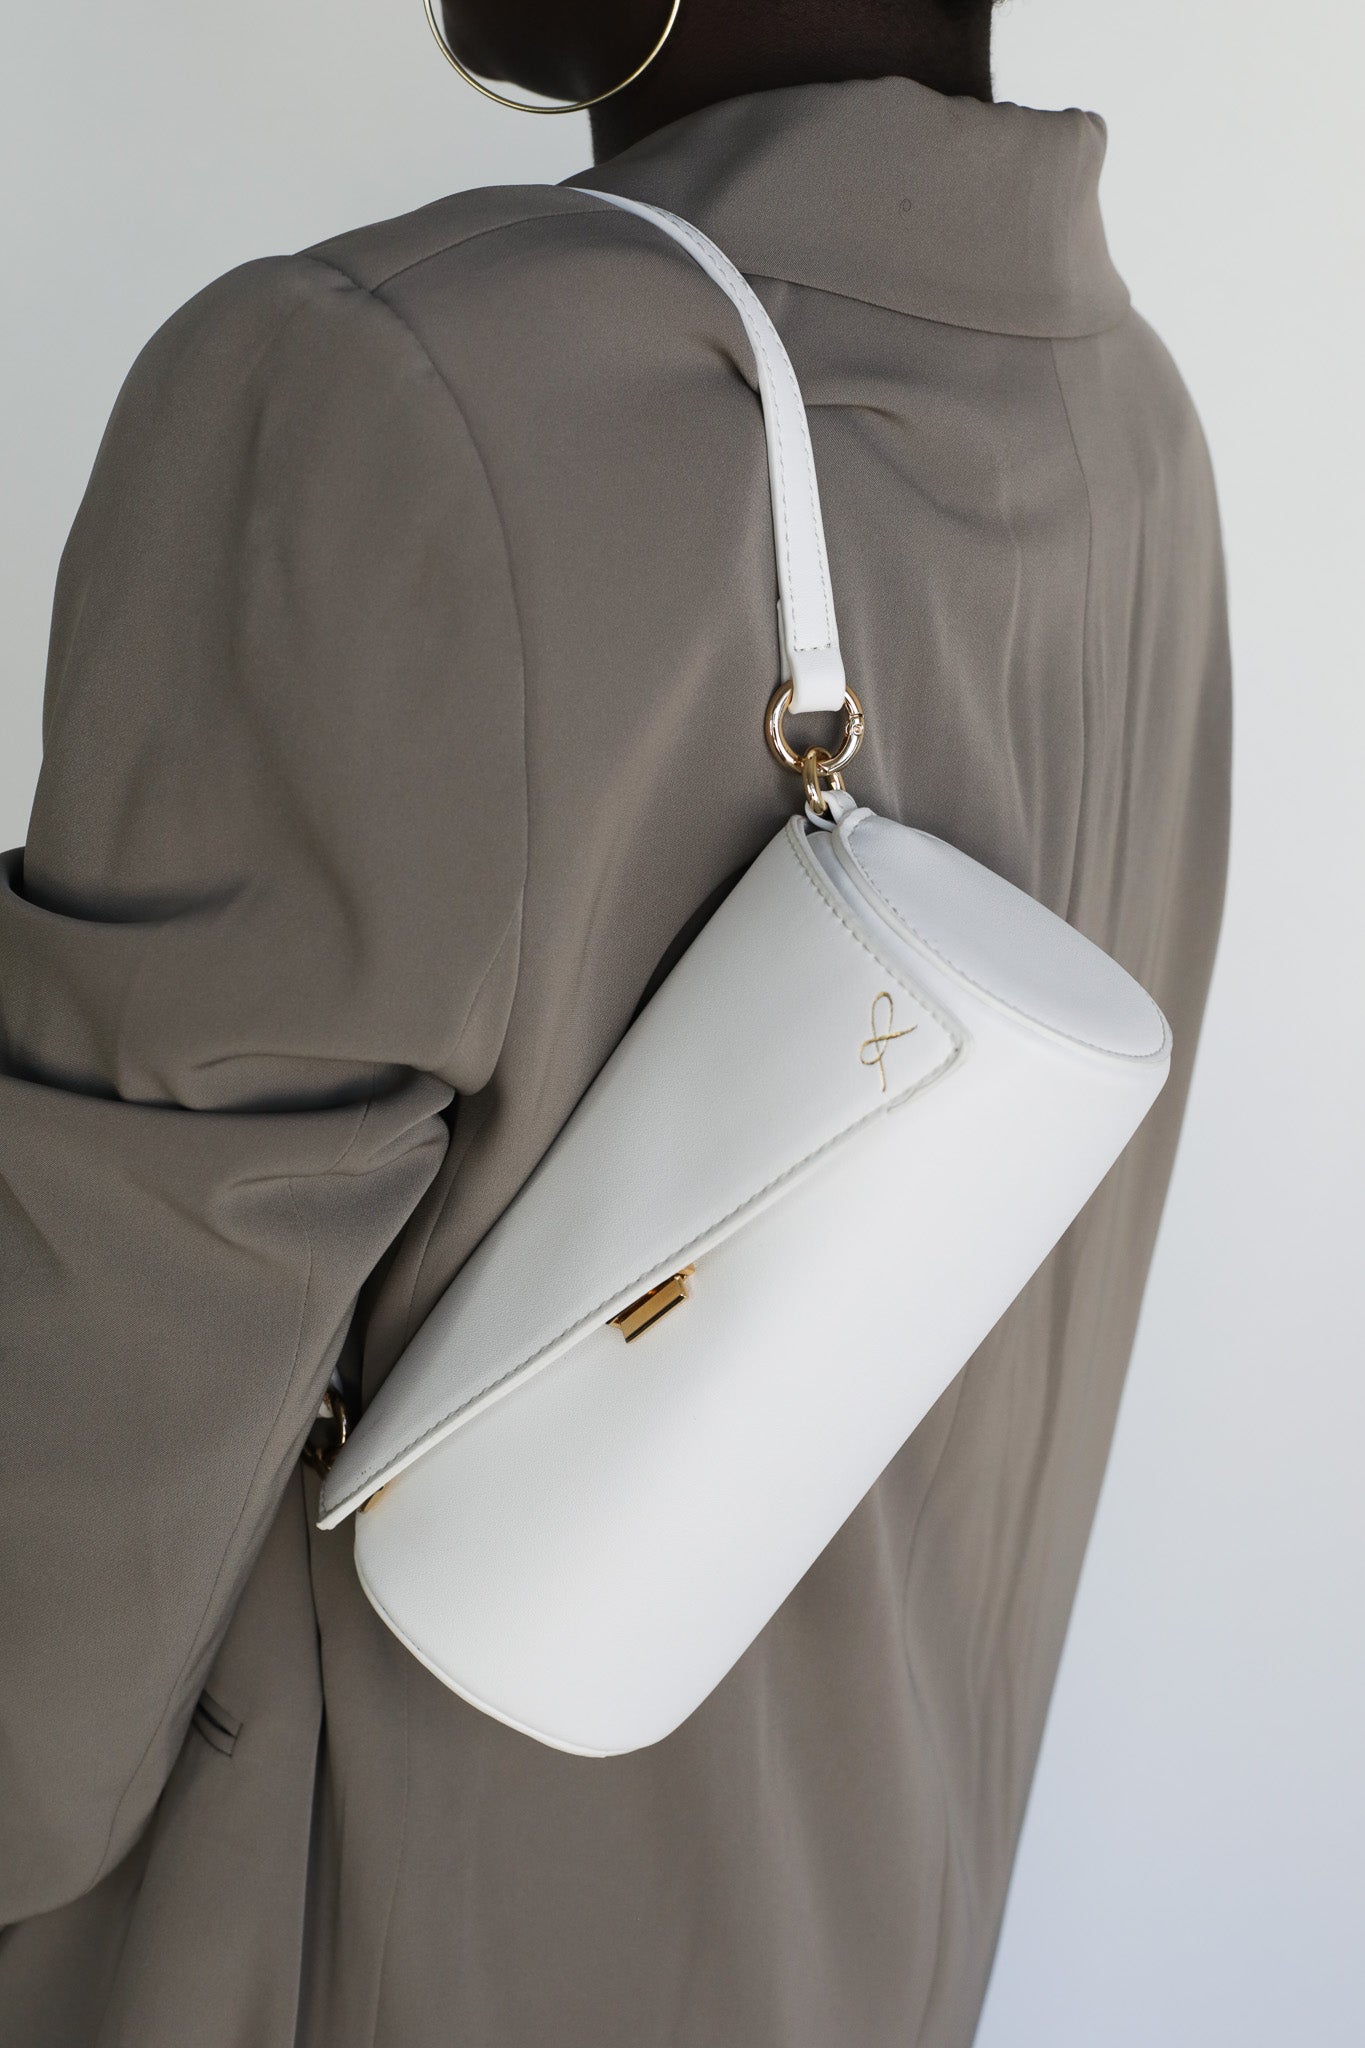 Cylinder Shaped Handbag in the color White. Bag shown with short strap